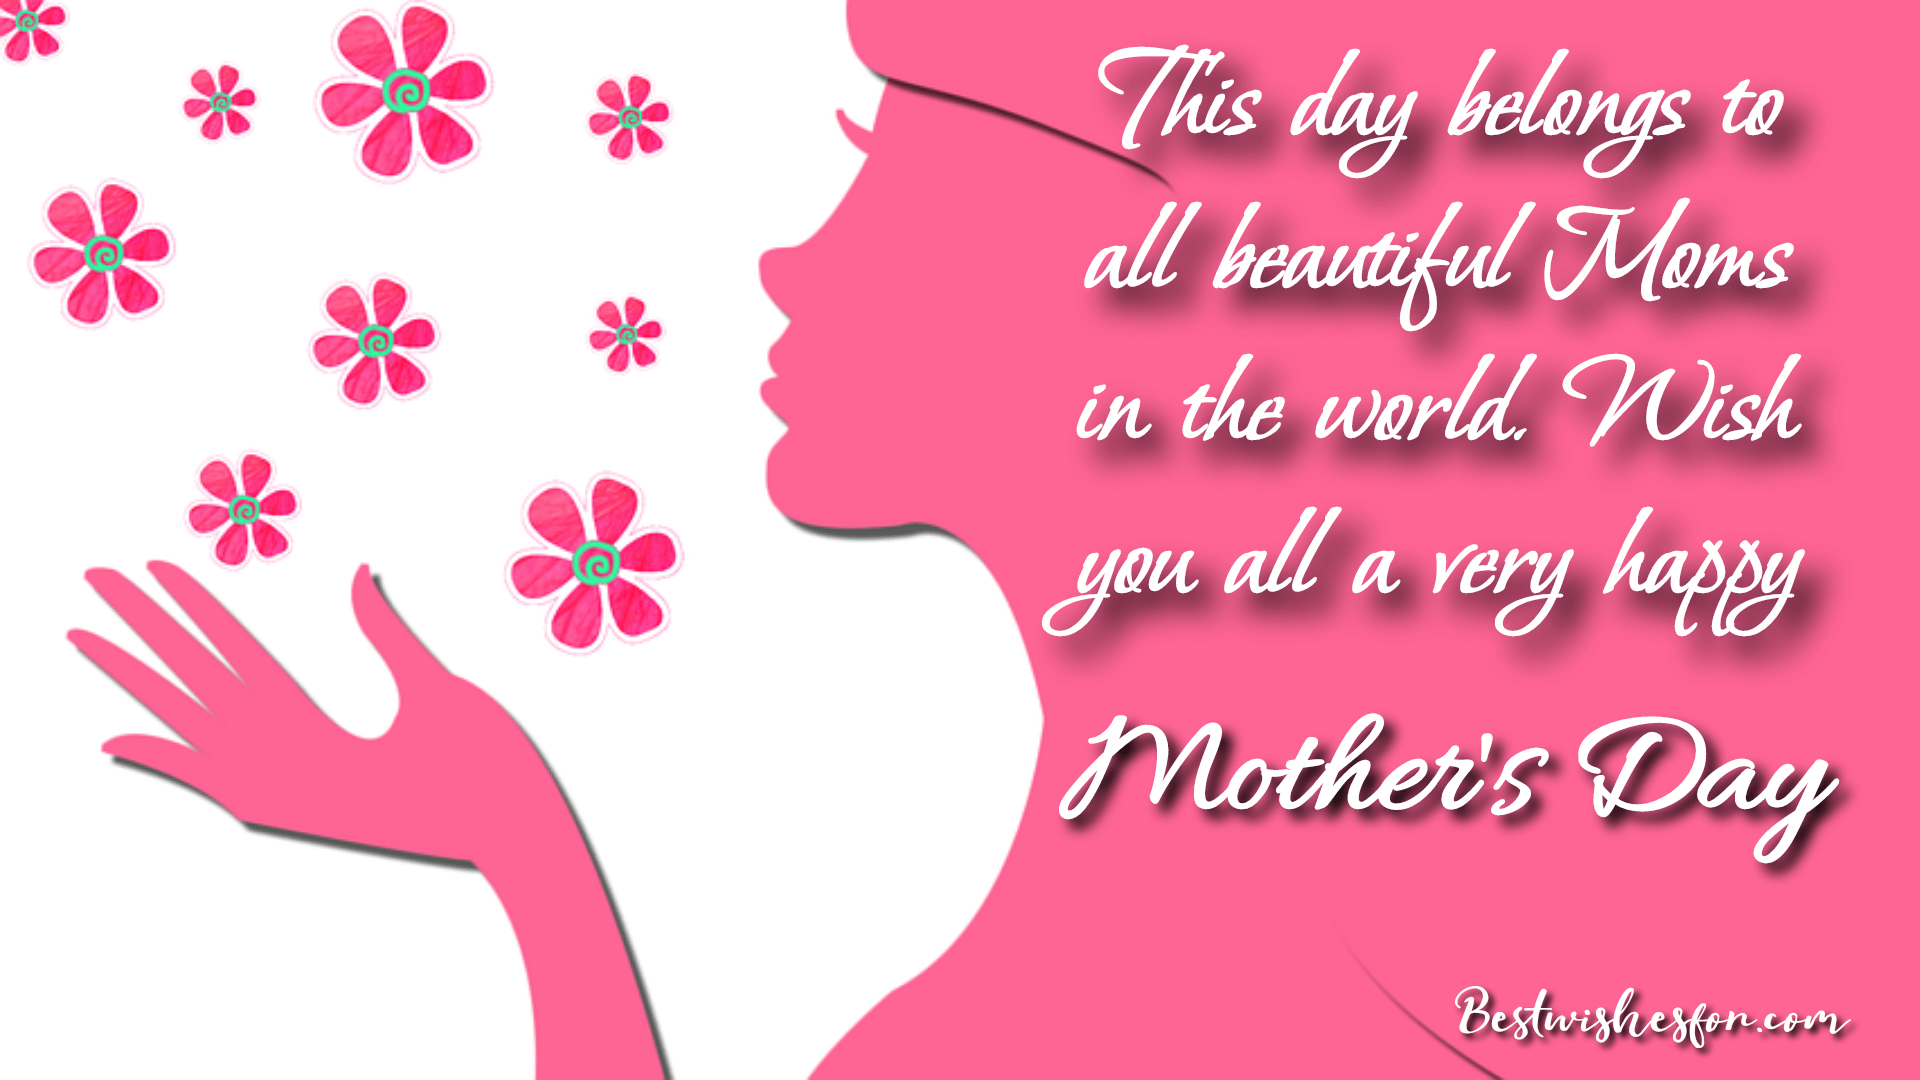 Happy Mother's Day To All Moms | Best Wishes